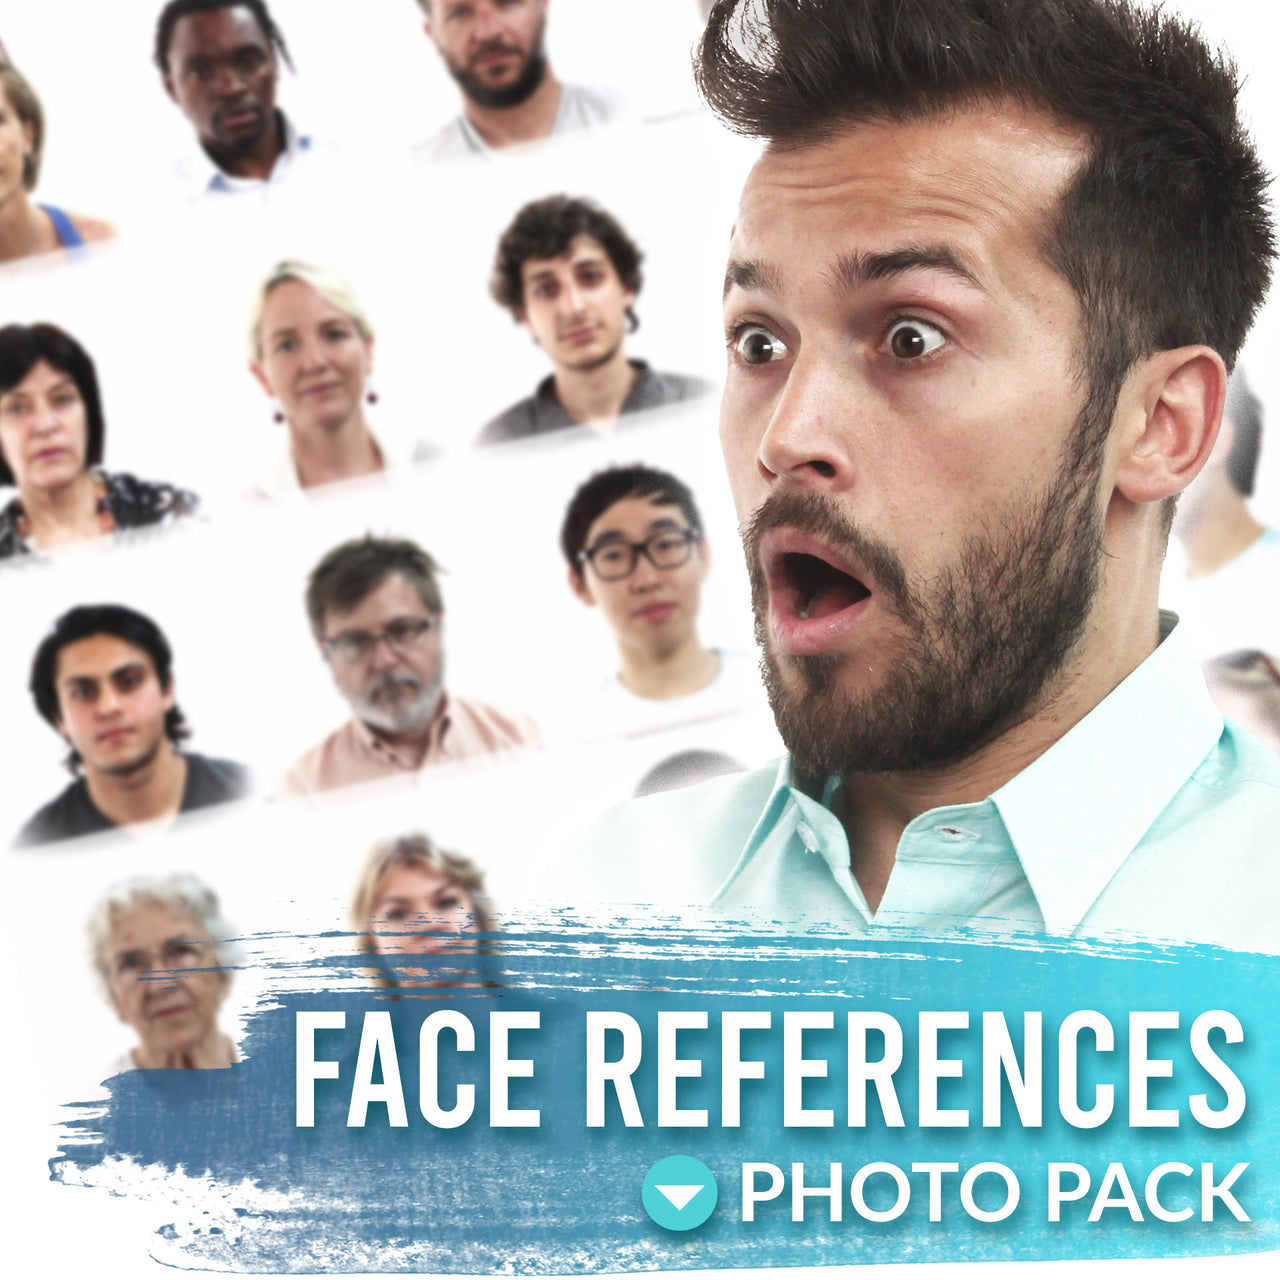 The Faces Reference Pack